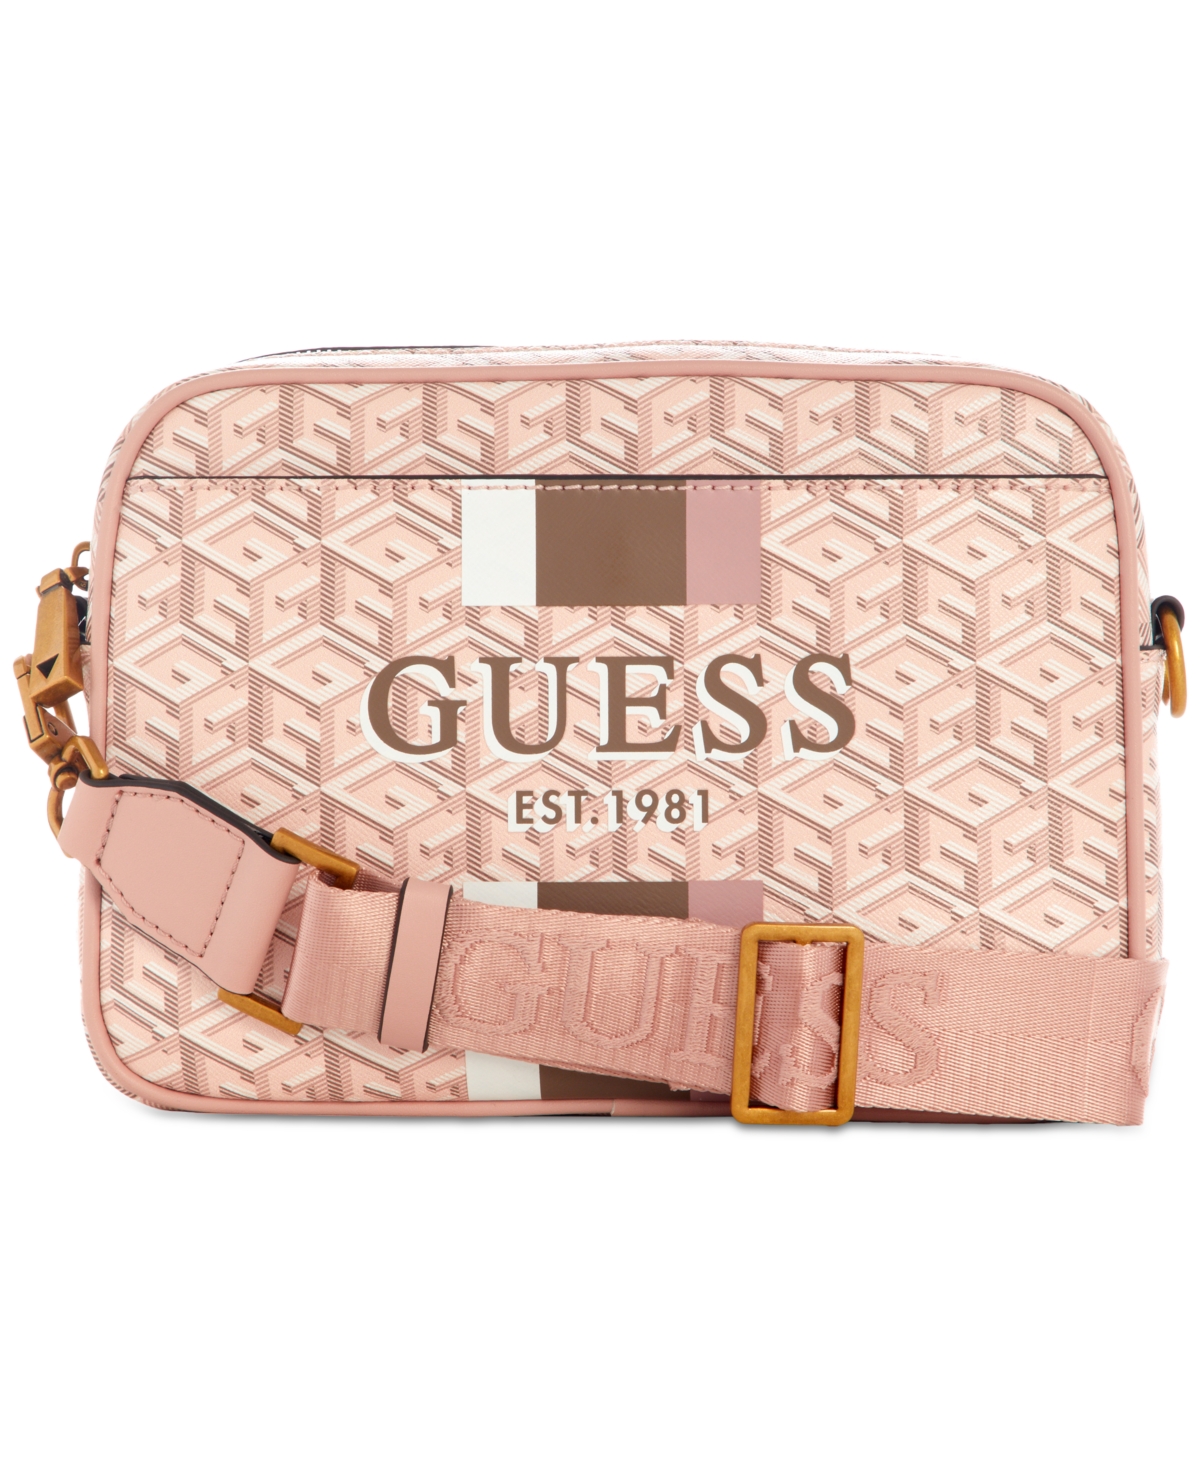 GUESS on Instagram: Designed in a G Cube print, meet the carry all Vikky  Tote & Montreal Convertible Crossbody #GUESSHandbags